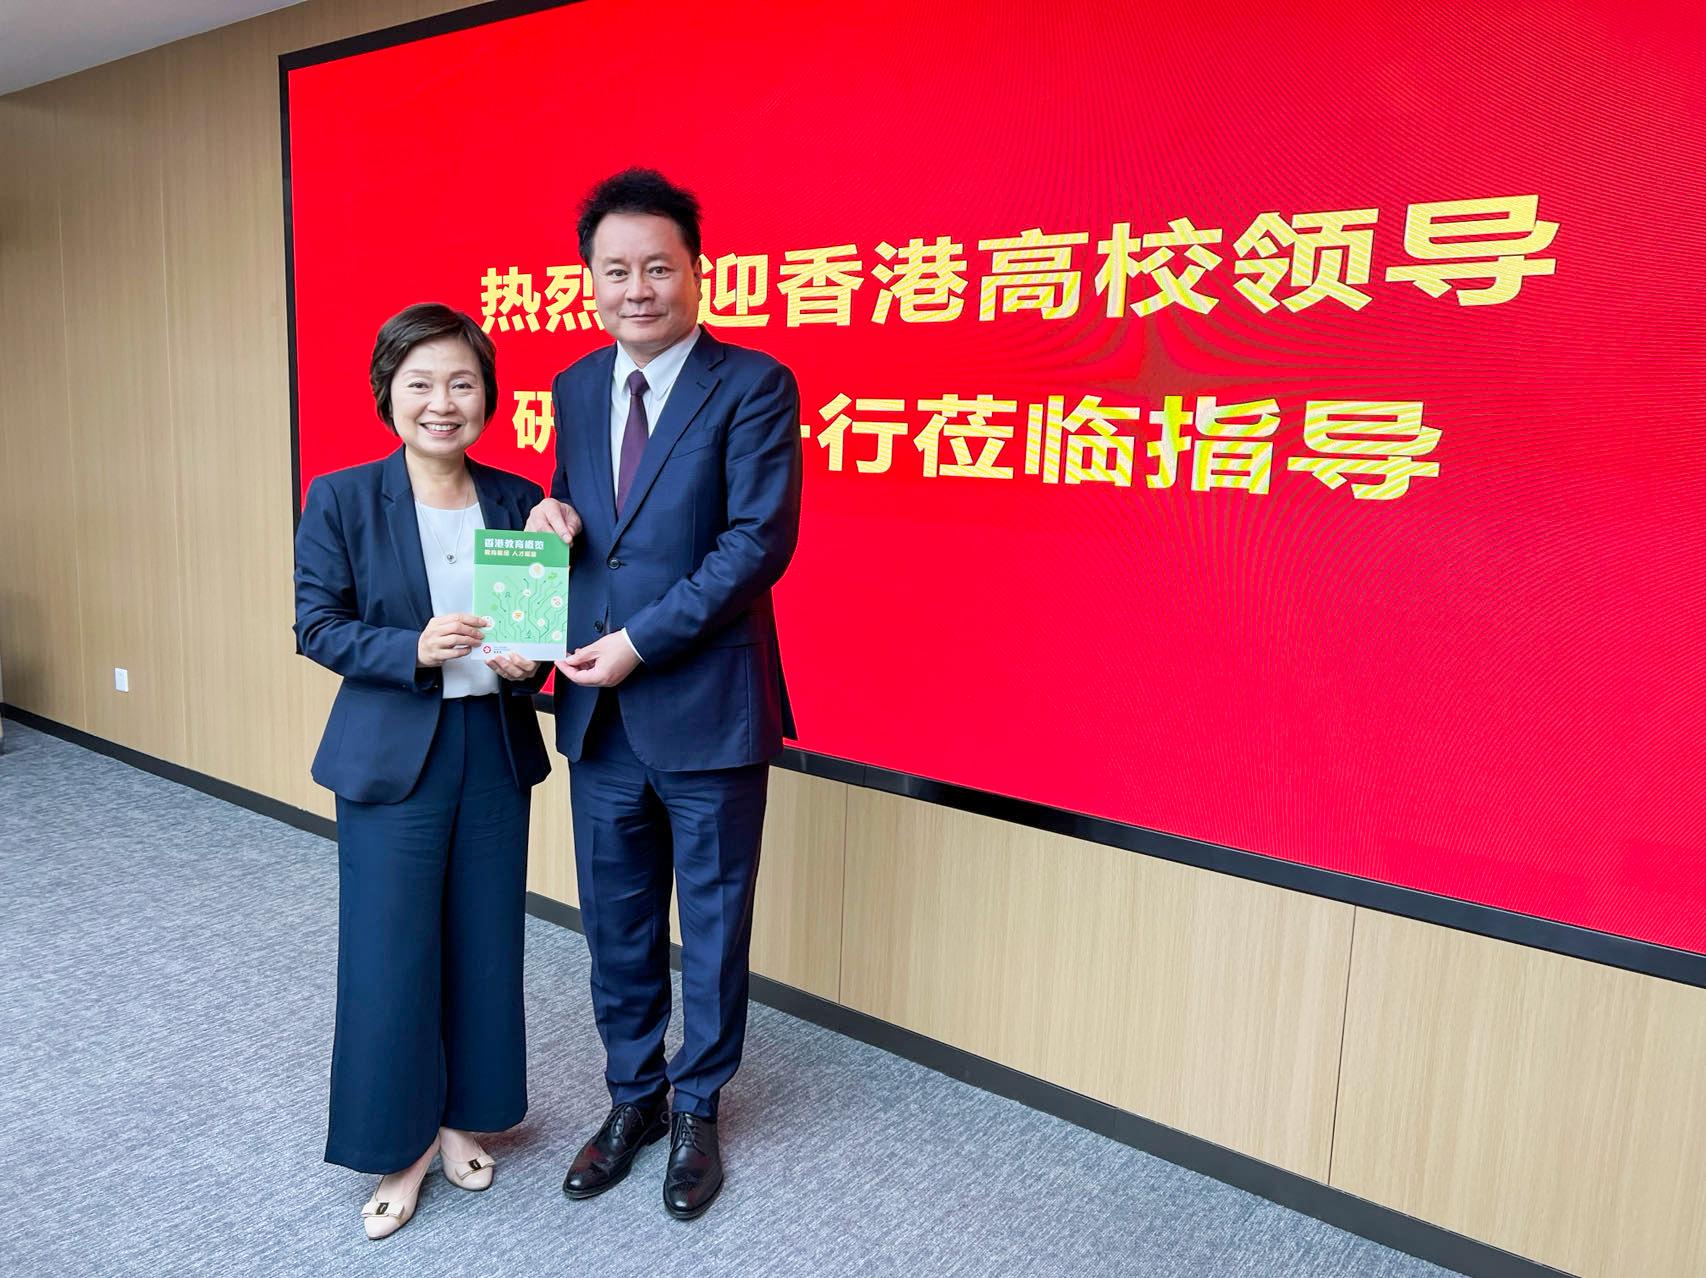 The Secretary for Education, Dr Choi Yuk-lin, is leading a delegation of Hong Kong higher education institutions to visit Beijing for two consecutive days (May 8 and 9). They toured the Changping Laboratory yesterday (May 8). Photo shows Dr Choi (left) and the Director of the Changping Laboratory and academician of the Chinese Academy of Sciences, Professor Sunney Xie (right).